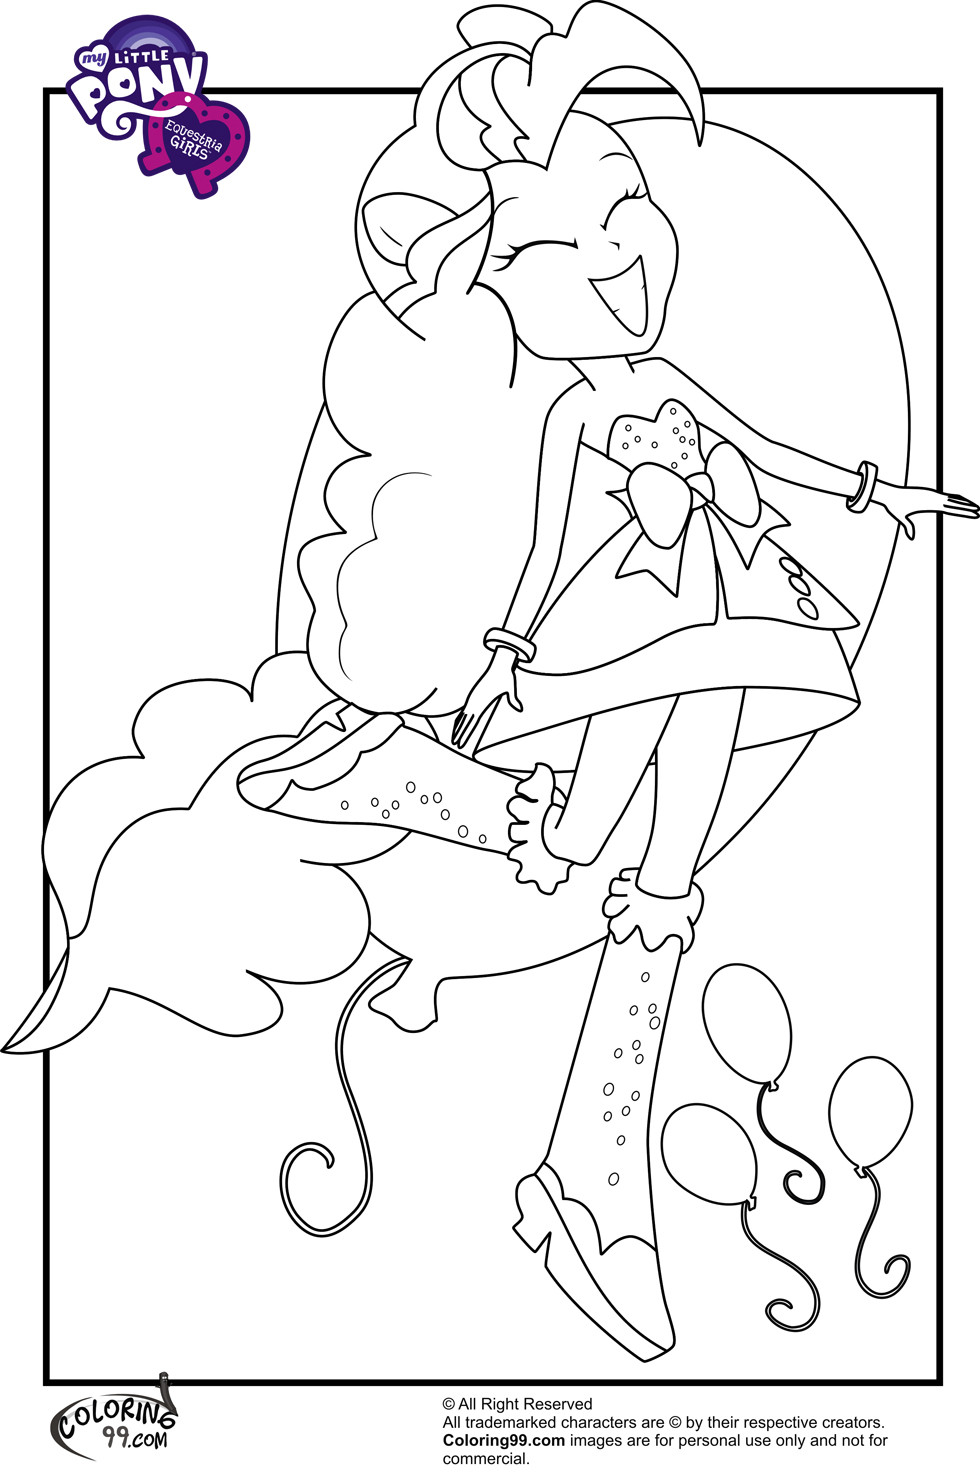 Equestria Girls Pinkie Pie Coloring Pages
 My Little Pony Equestria Girls Coloring Pages